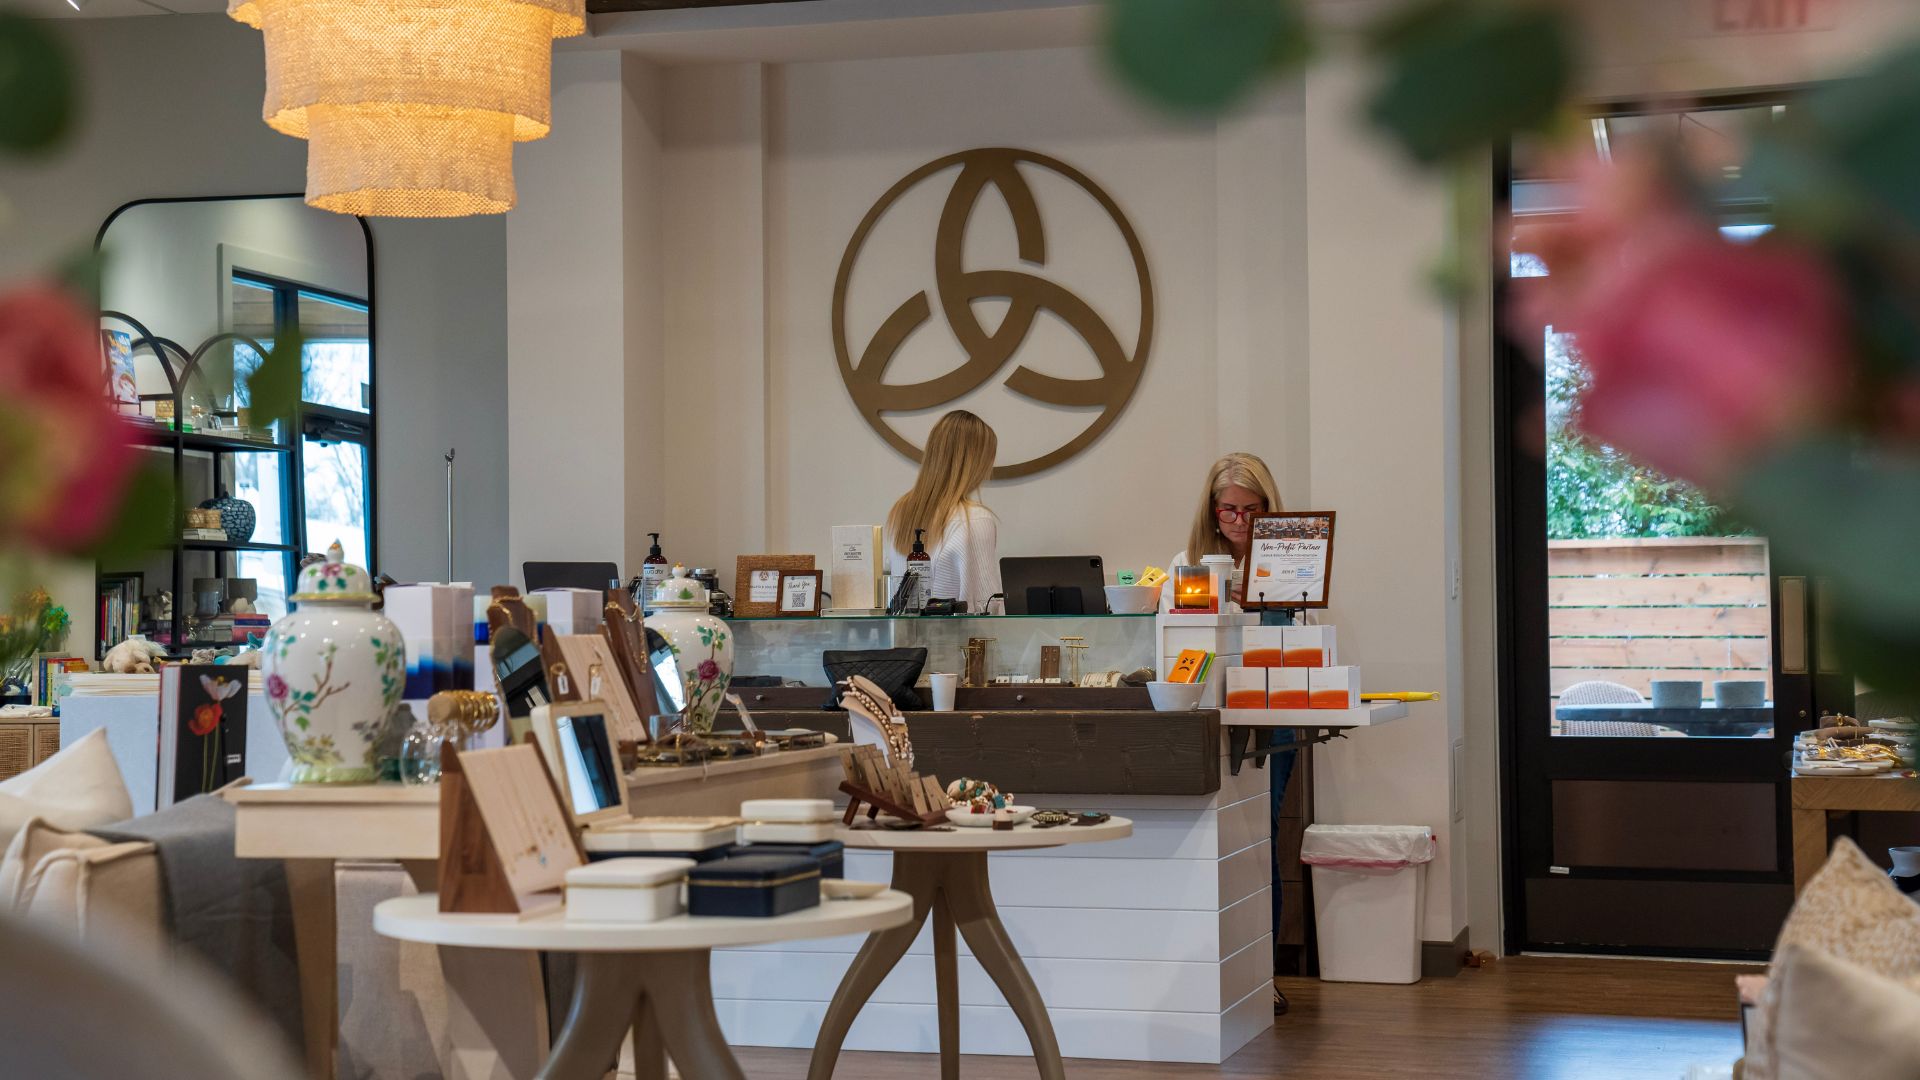 The staff at Hearth & Soul has intimate knowledge of all the products in the store.